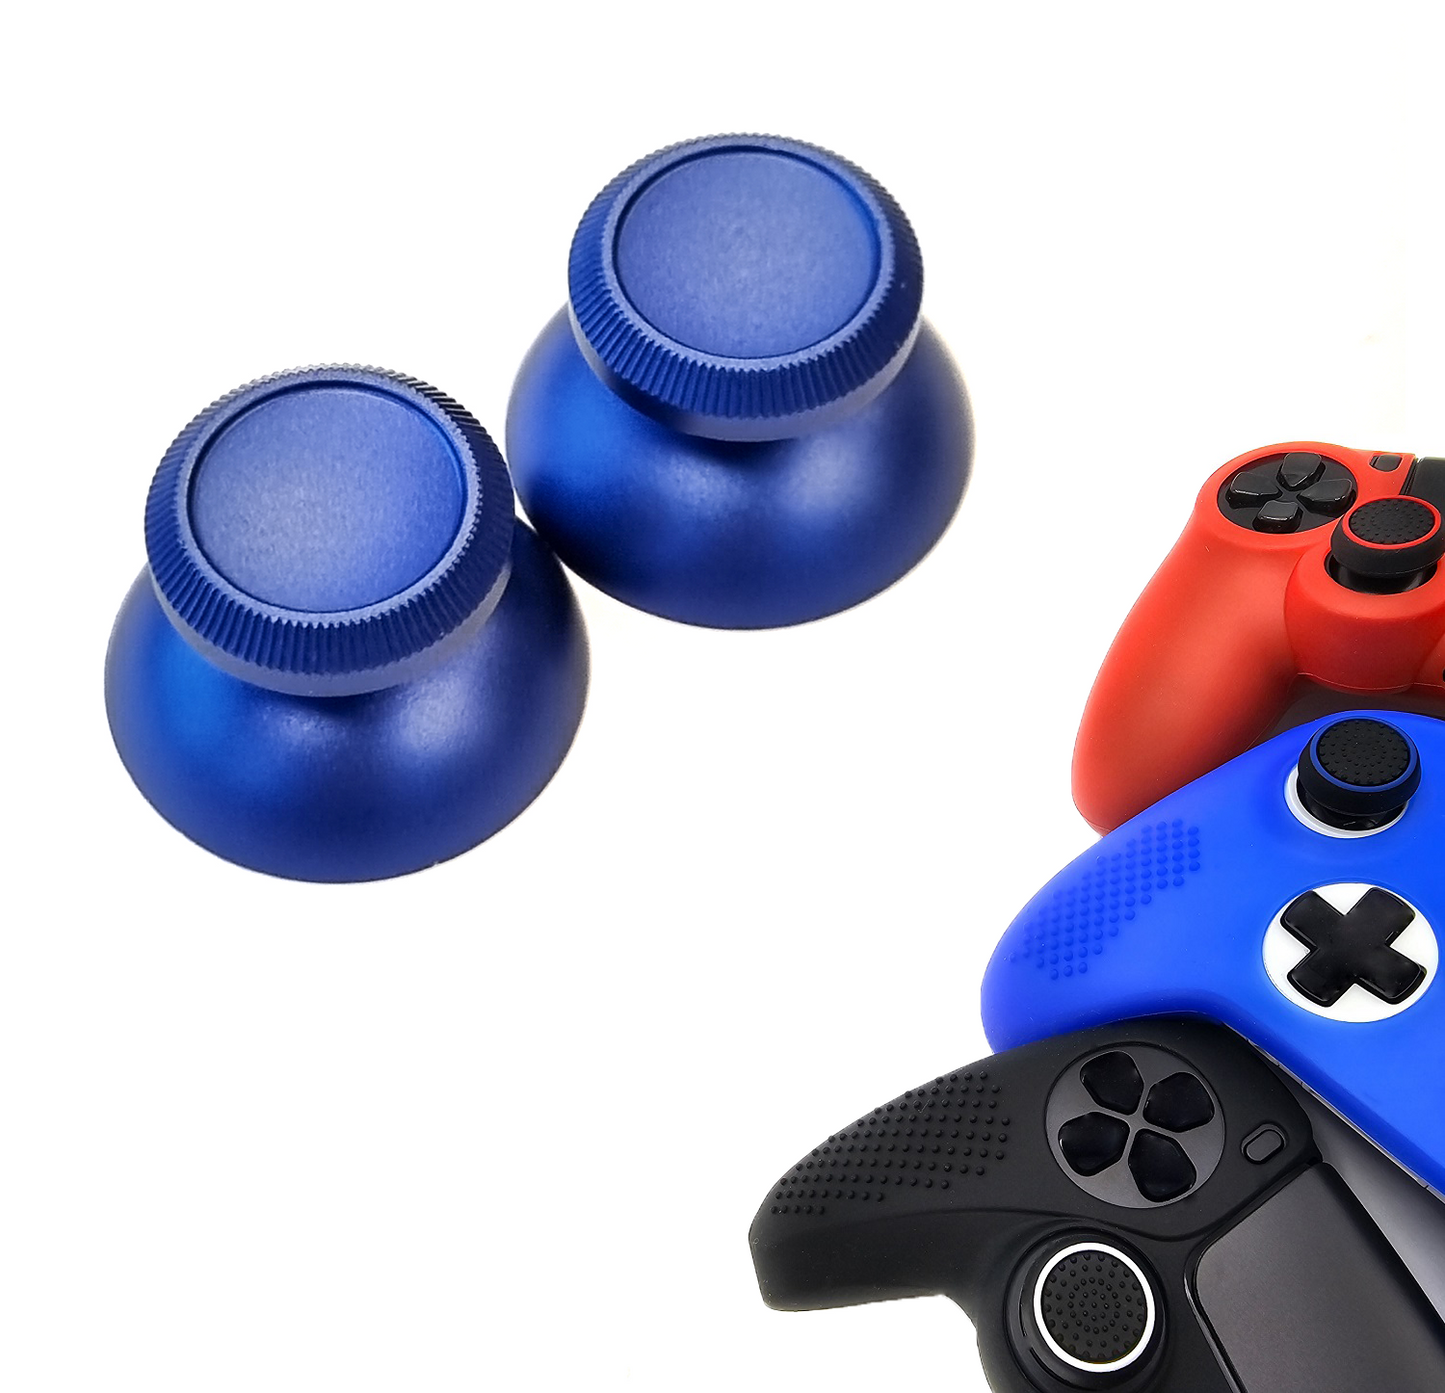 Gaming Thumb Grips | Performance Anti-slip Thumbsticks | Joystick Cap Thumb Grips | Shiny - Blue | Accessories suitable for Playstation PS4 PS5 &amp; Xbox &amp; Nintendo Pro Controller